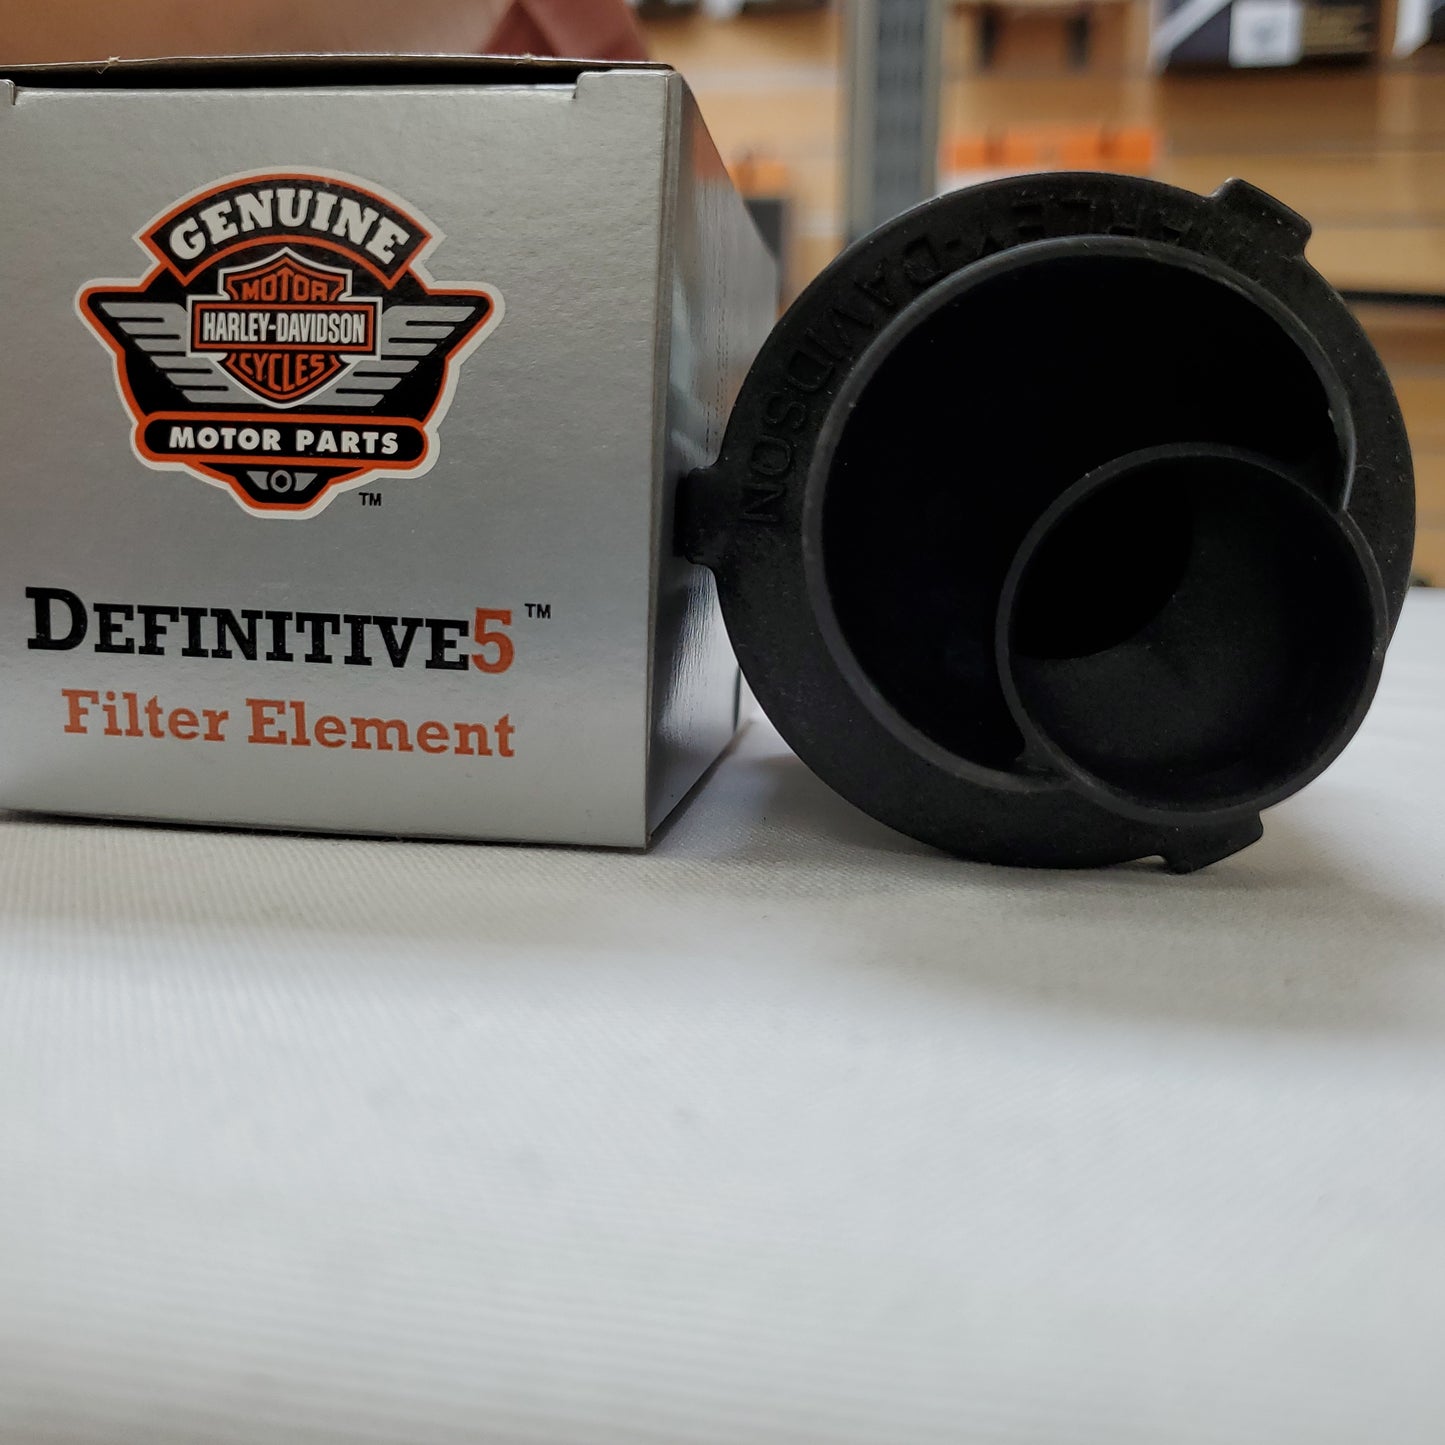 Replaceable oil filter element-Definitive5  Part#63834-07  Fits: Twin Cam models with Definitive filtration system., Stonewall Harley-Davidson